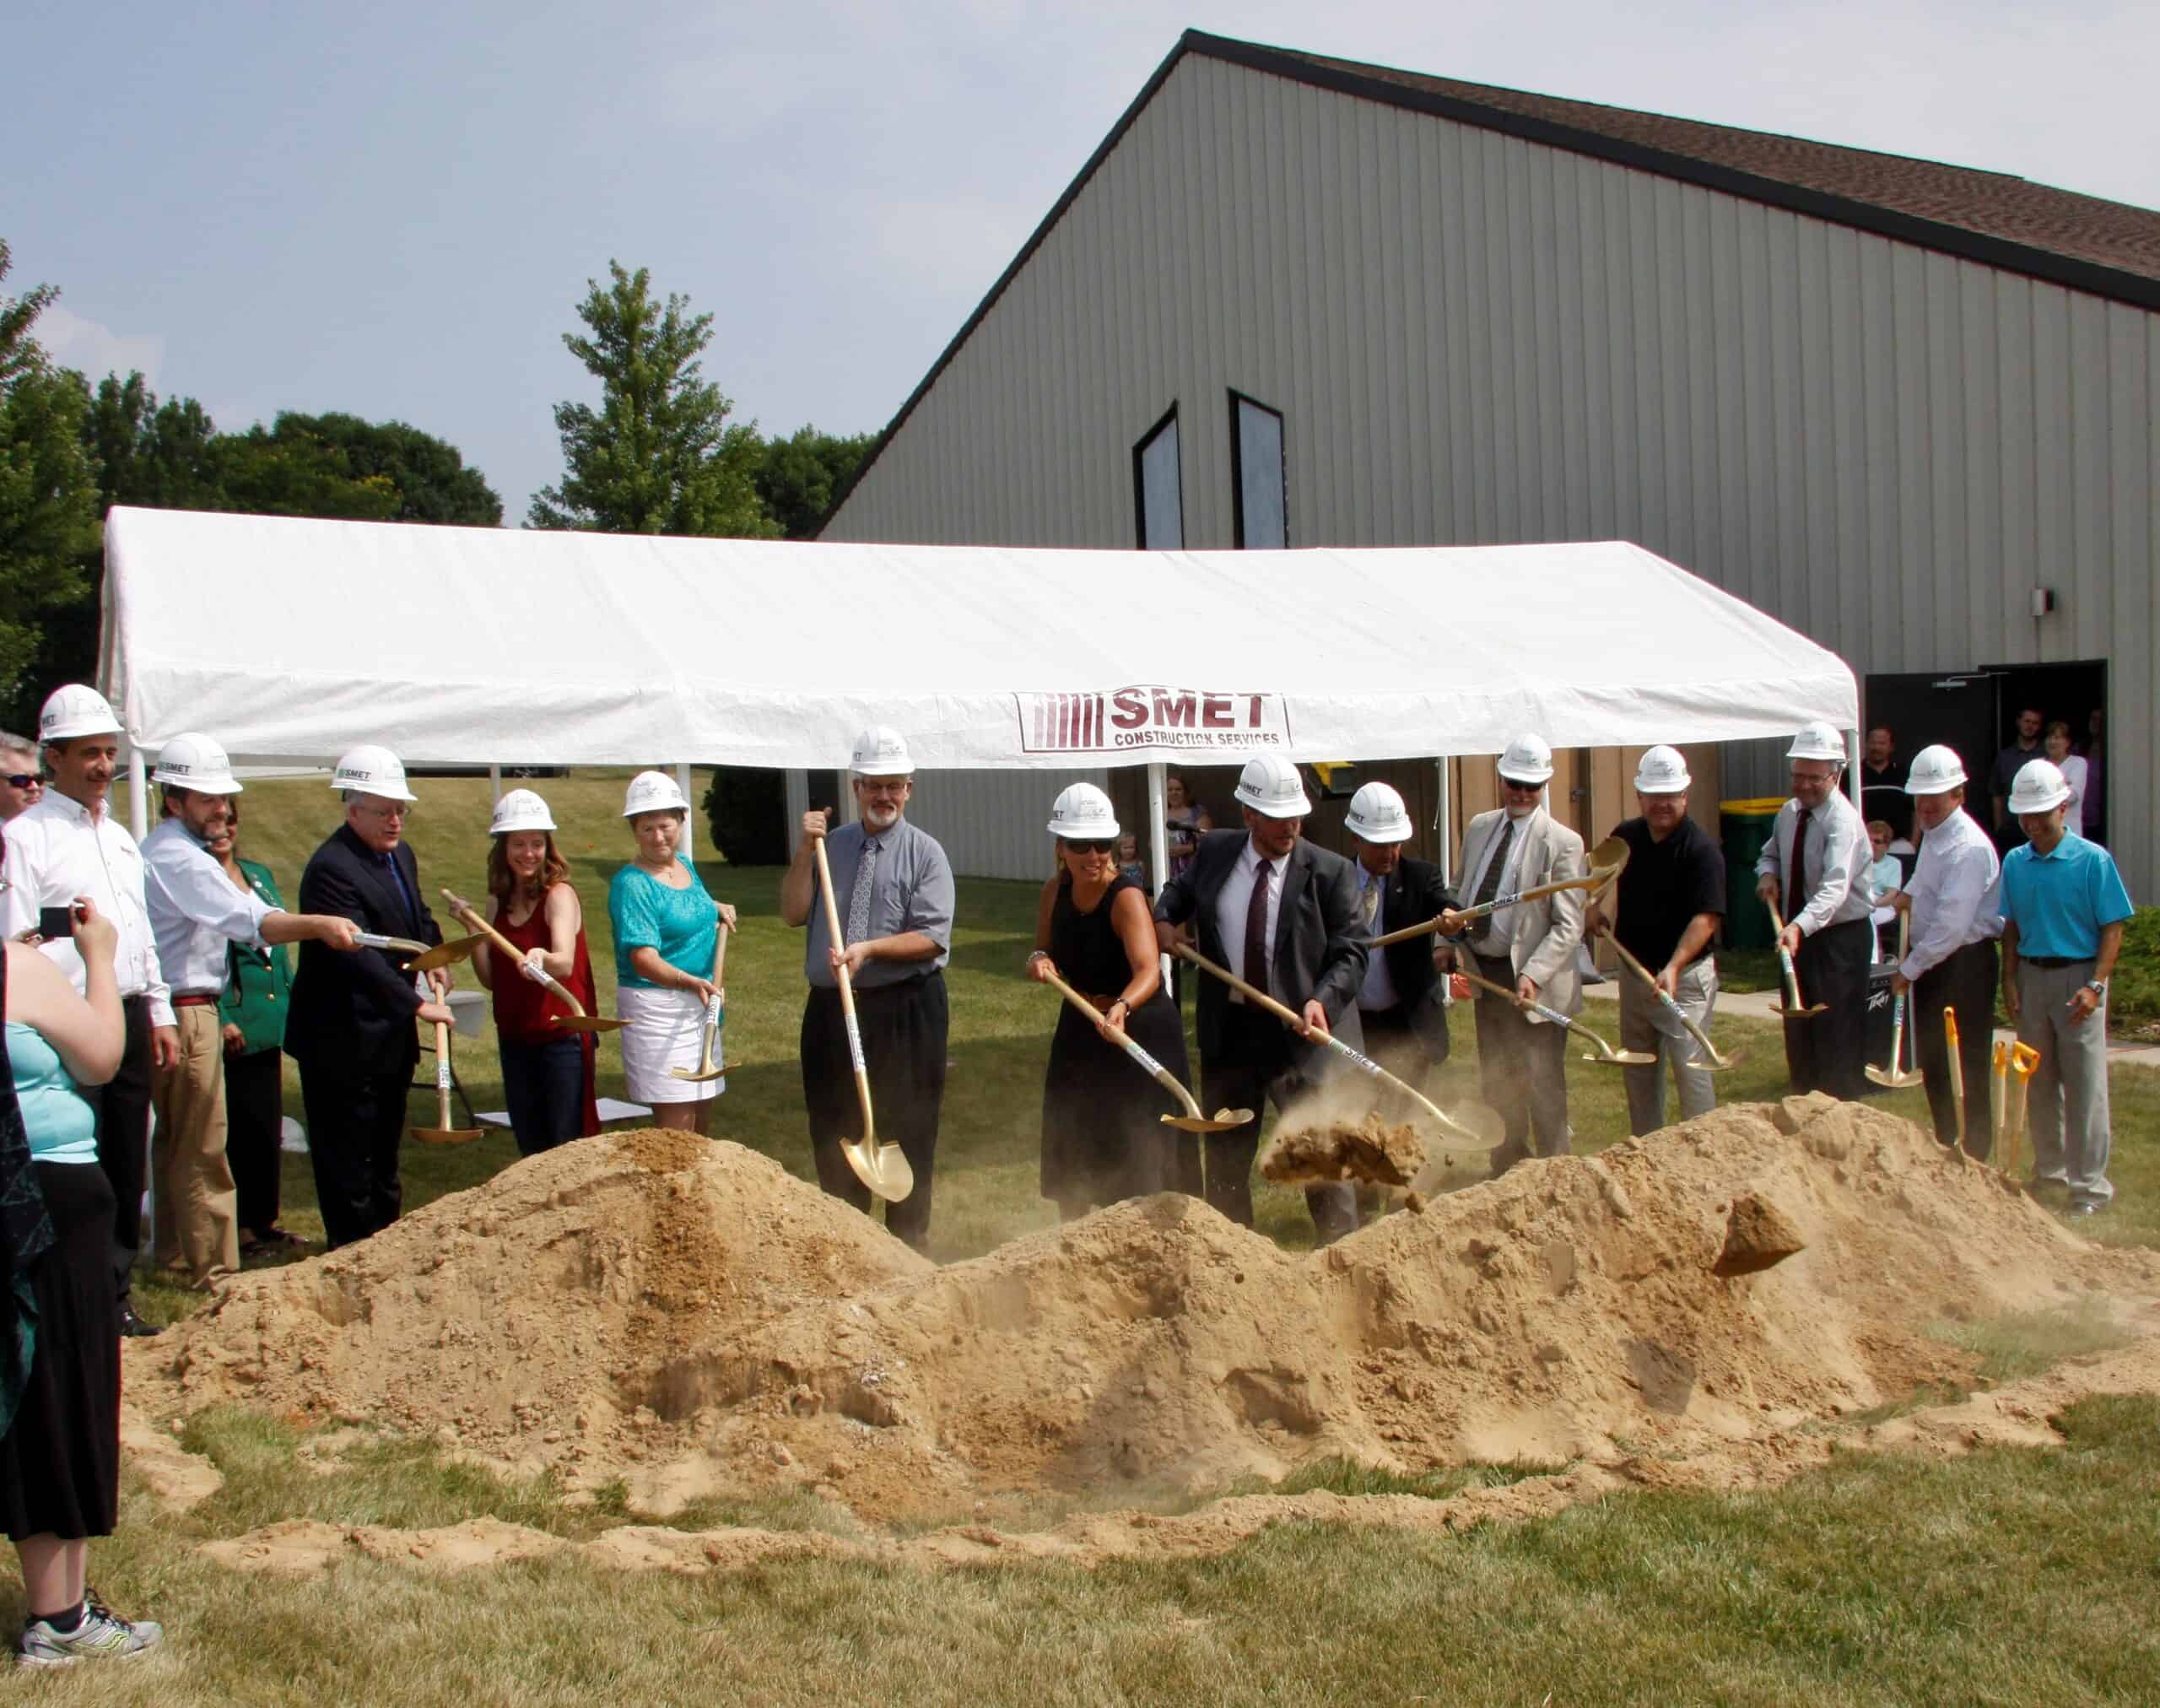 Grounbreaking for new addition at Beautiful Savior Lutheran Church, Green Bay, WI